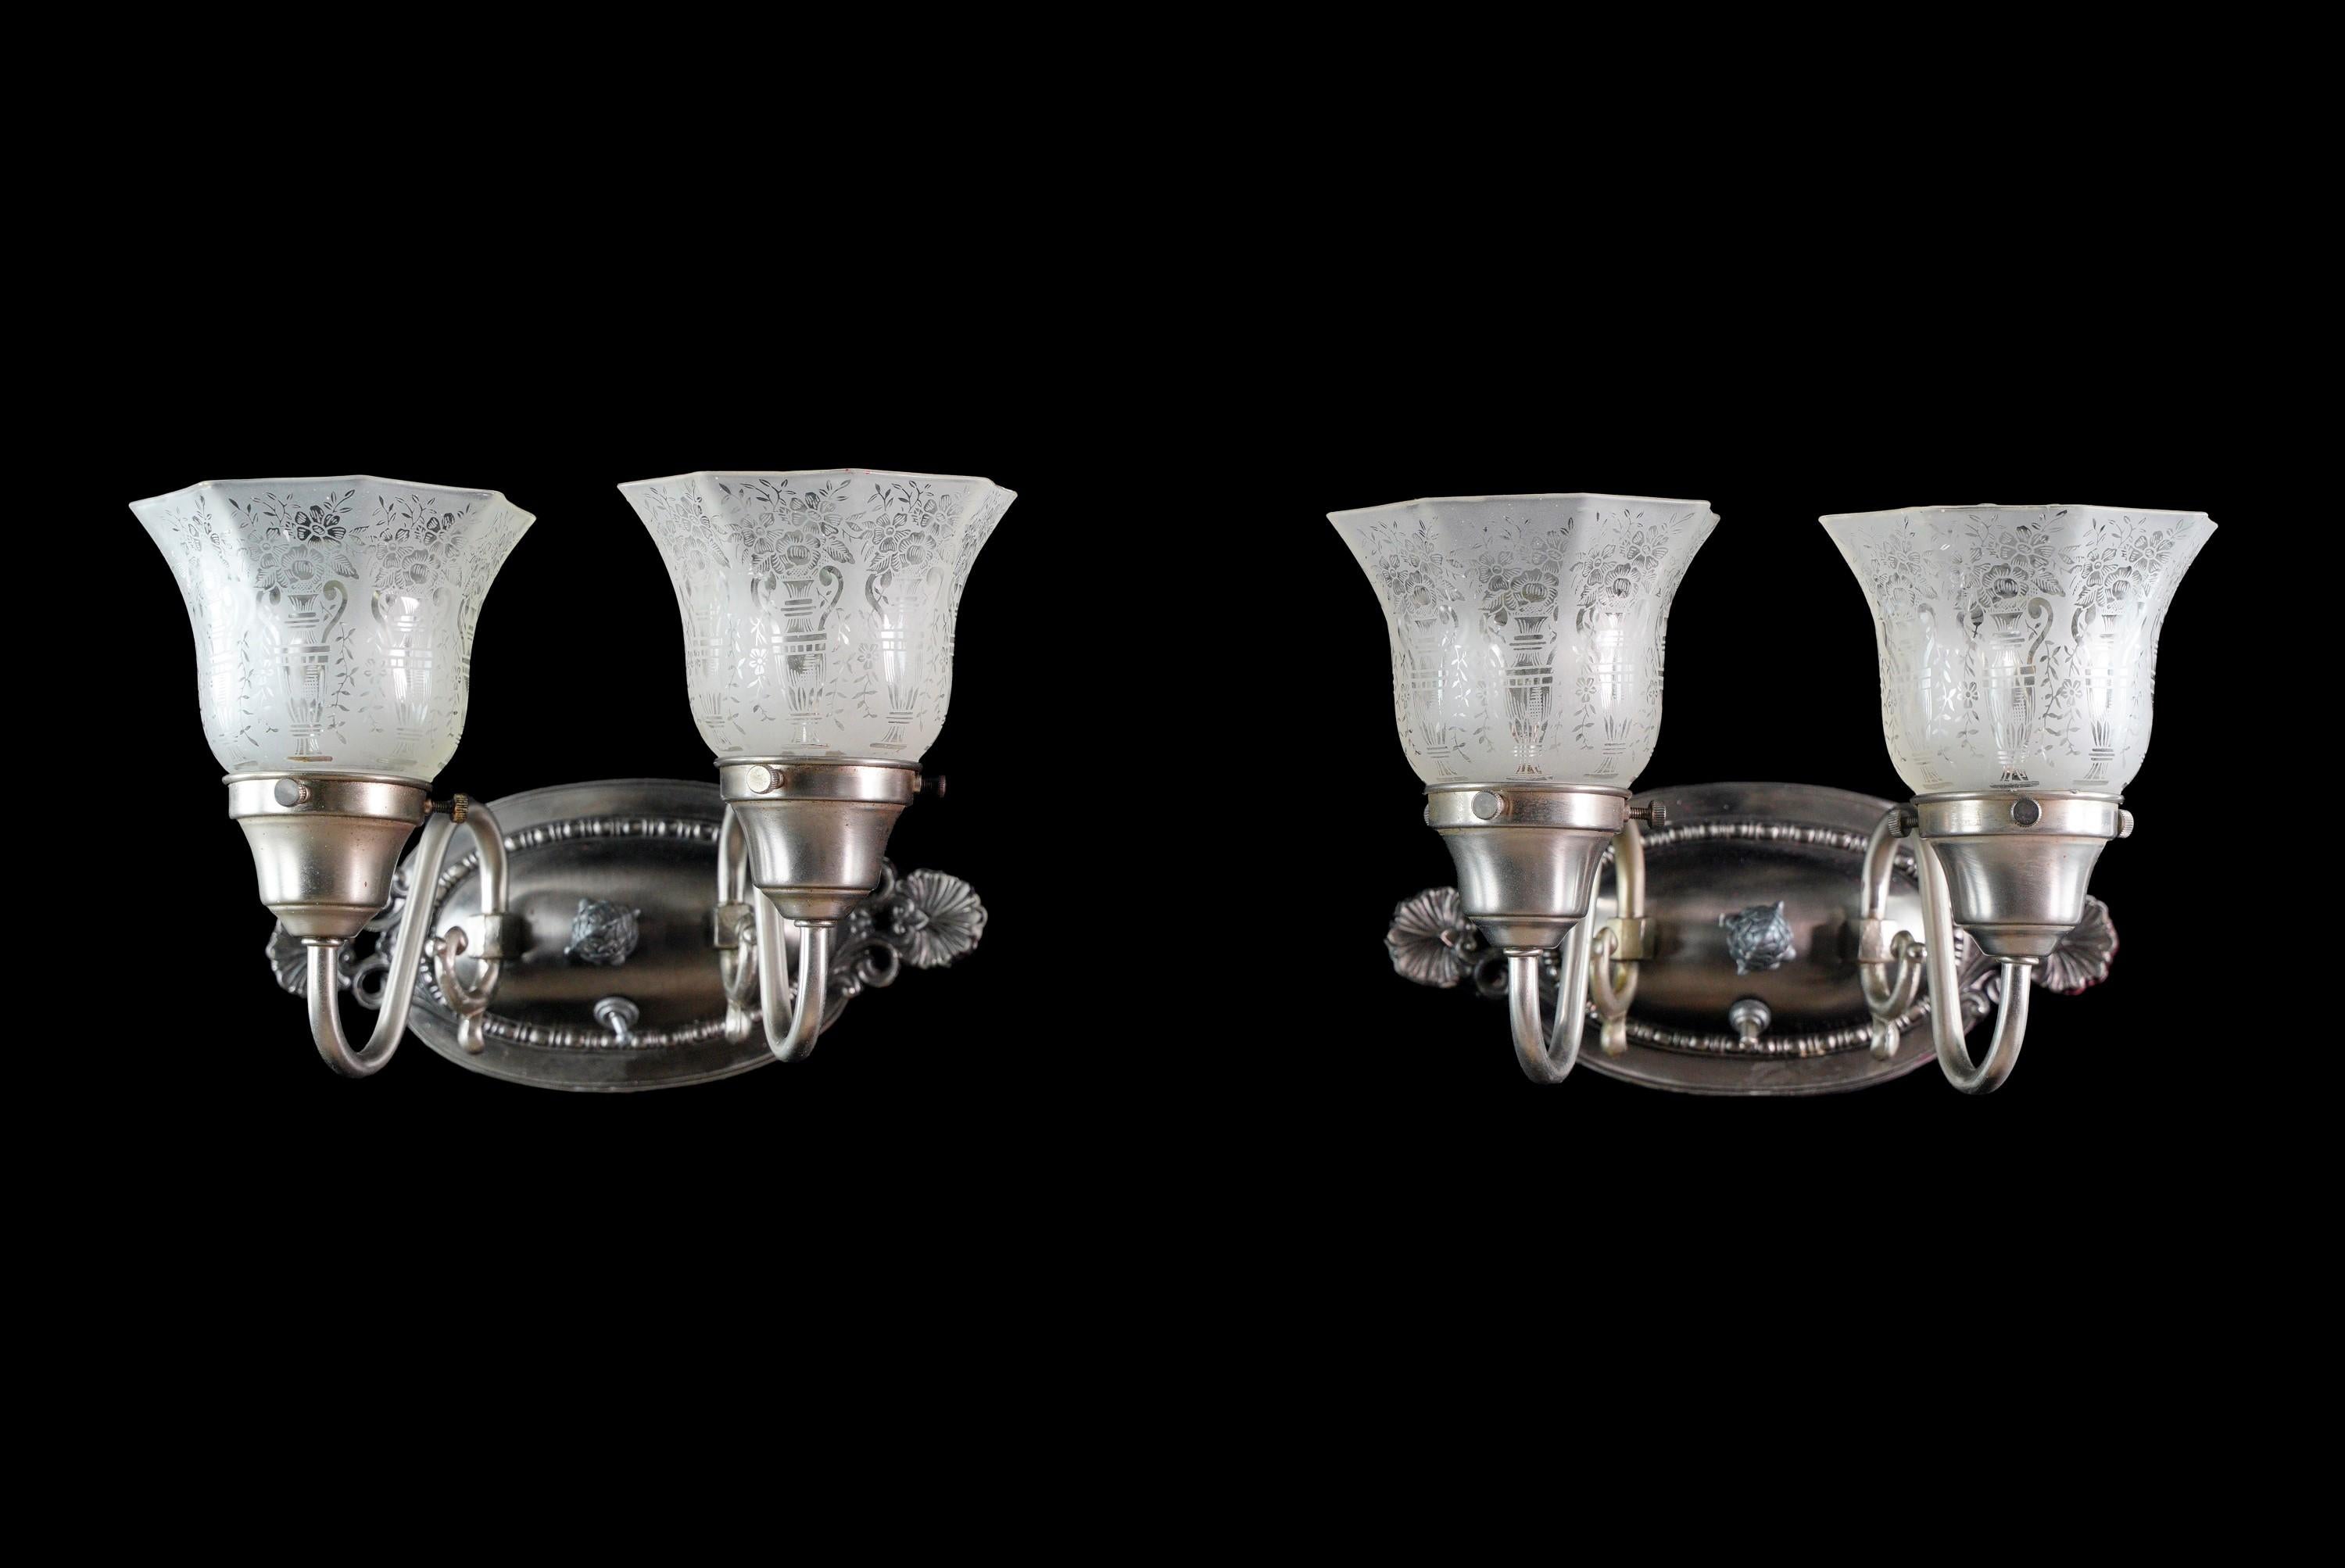 Nickel plated two arm wall sconces with frosted and etched glass shades with urn and floral detail. Cleaned and restored. They are in good condition, with some rust. Priced as a pair. The price includes restoration of cleaning and rewiring. Please